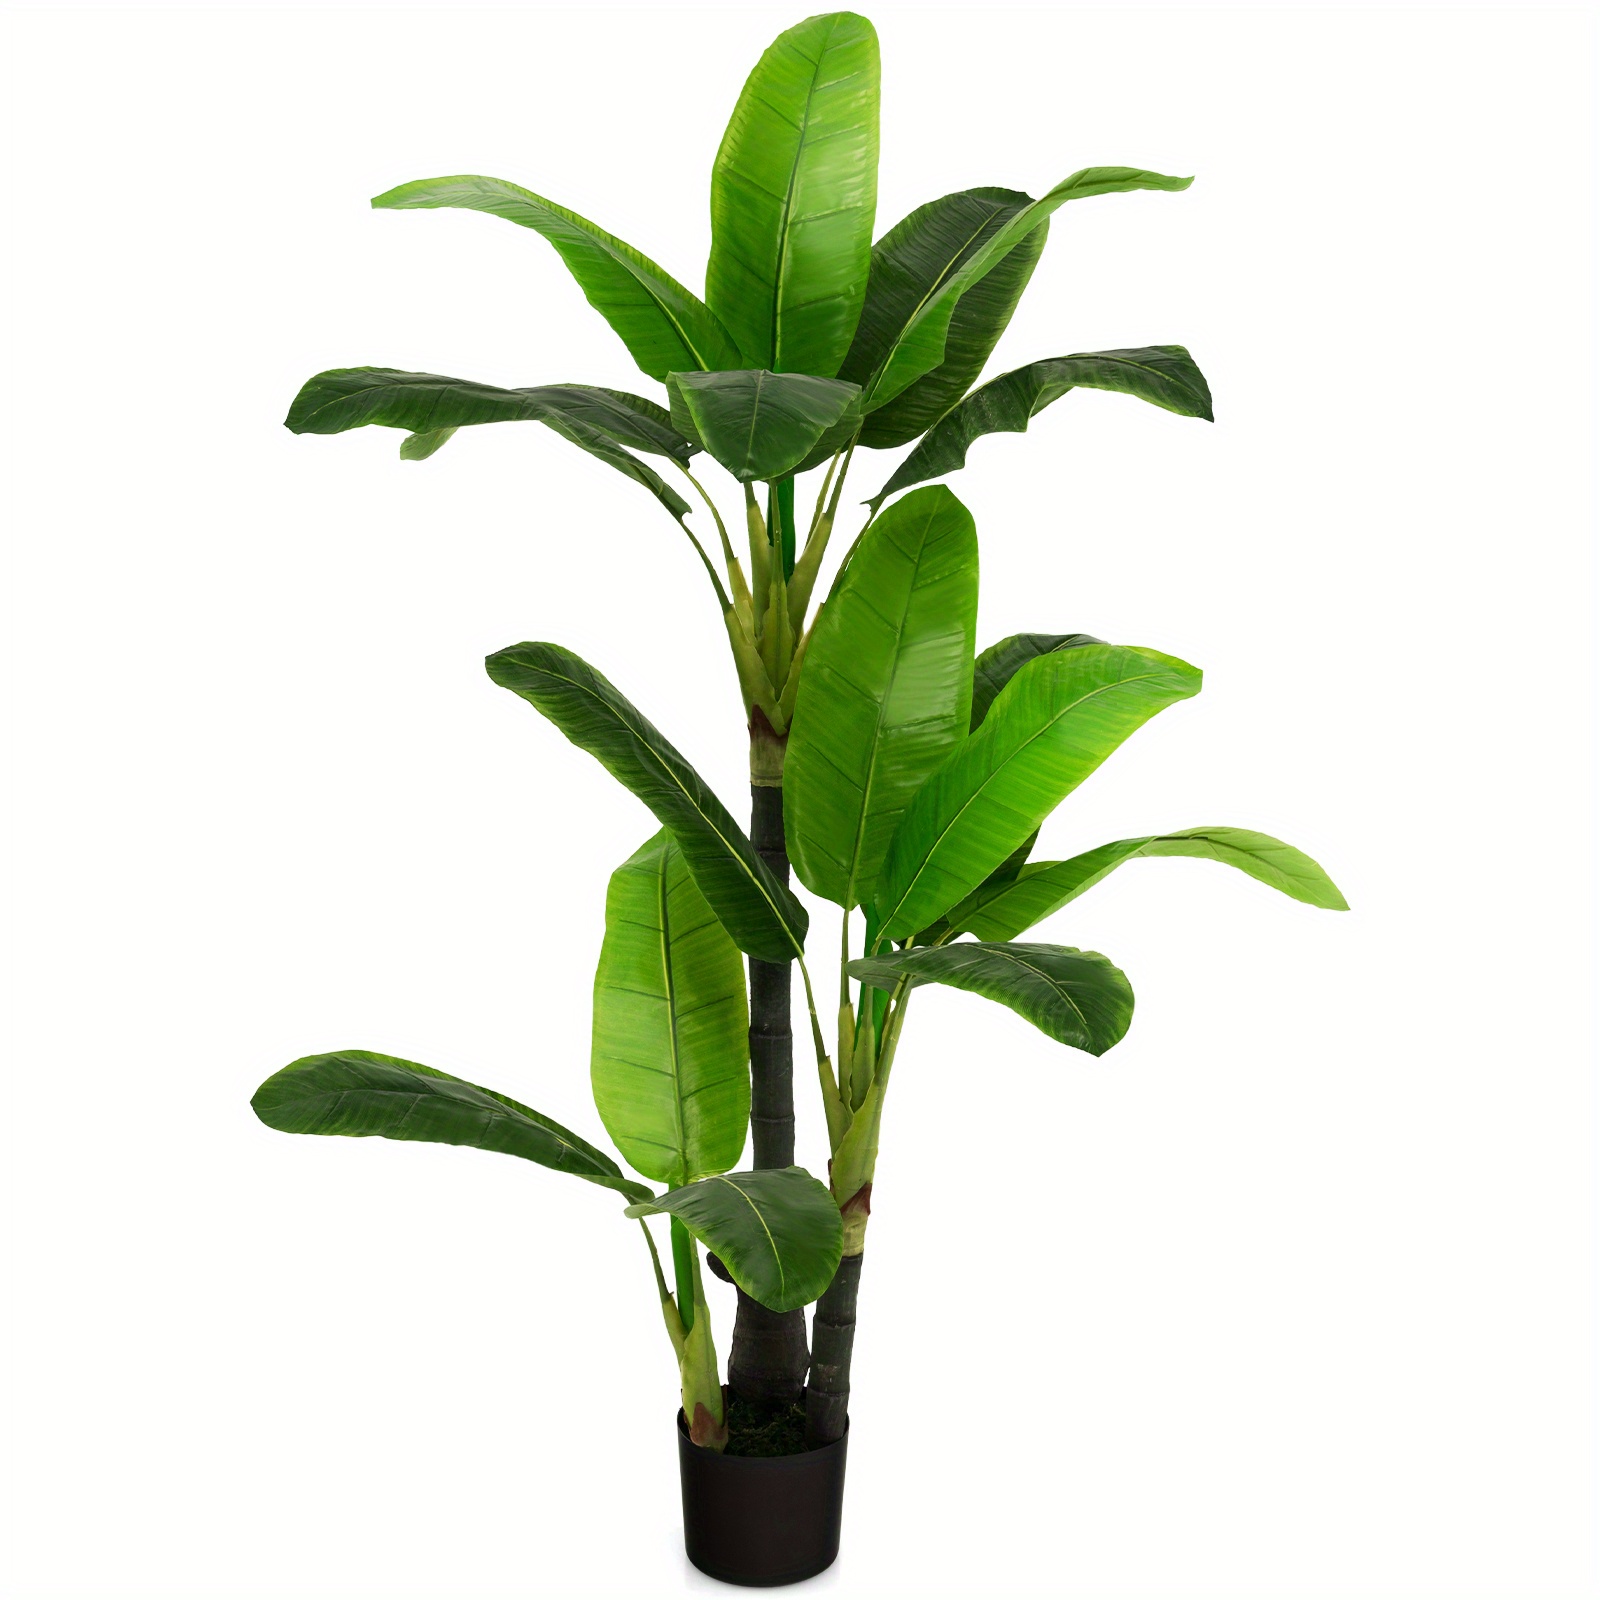 

5 Ft Artificial Tree Fake Banana Plant Faux Tropical Tree For Indoor & Outdoor